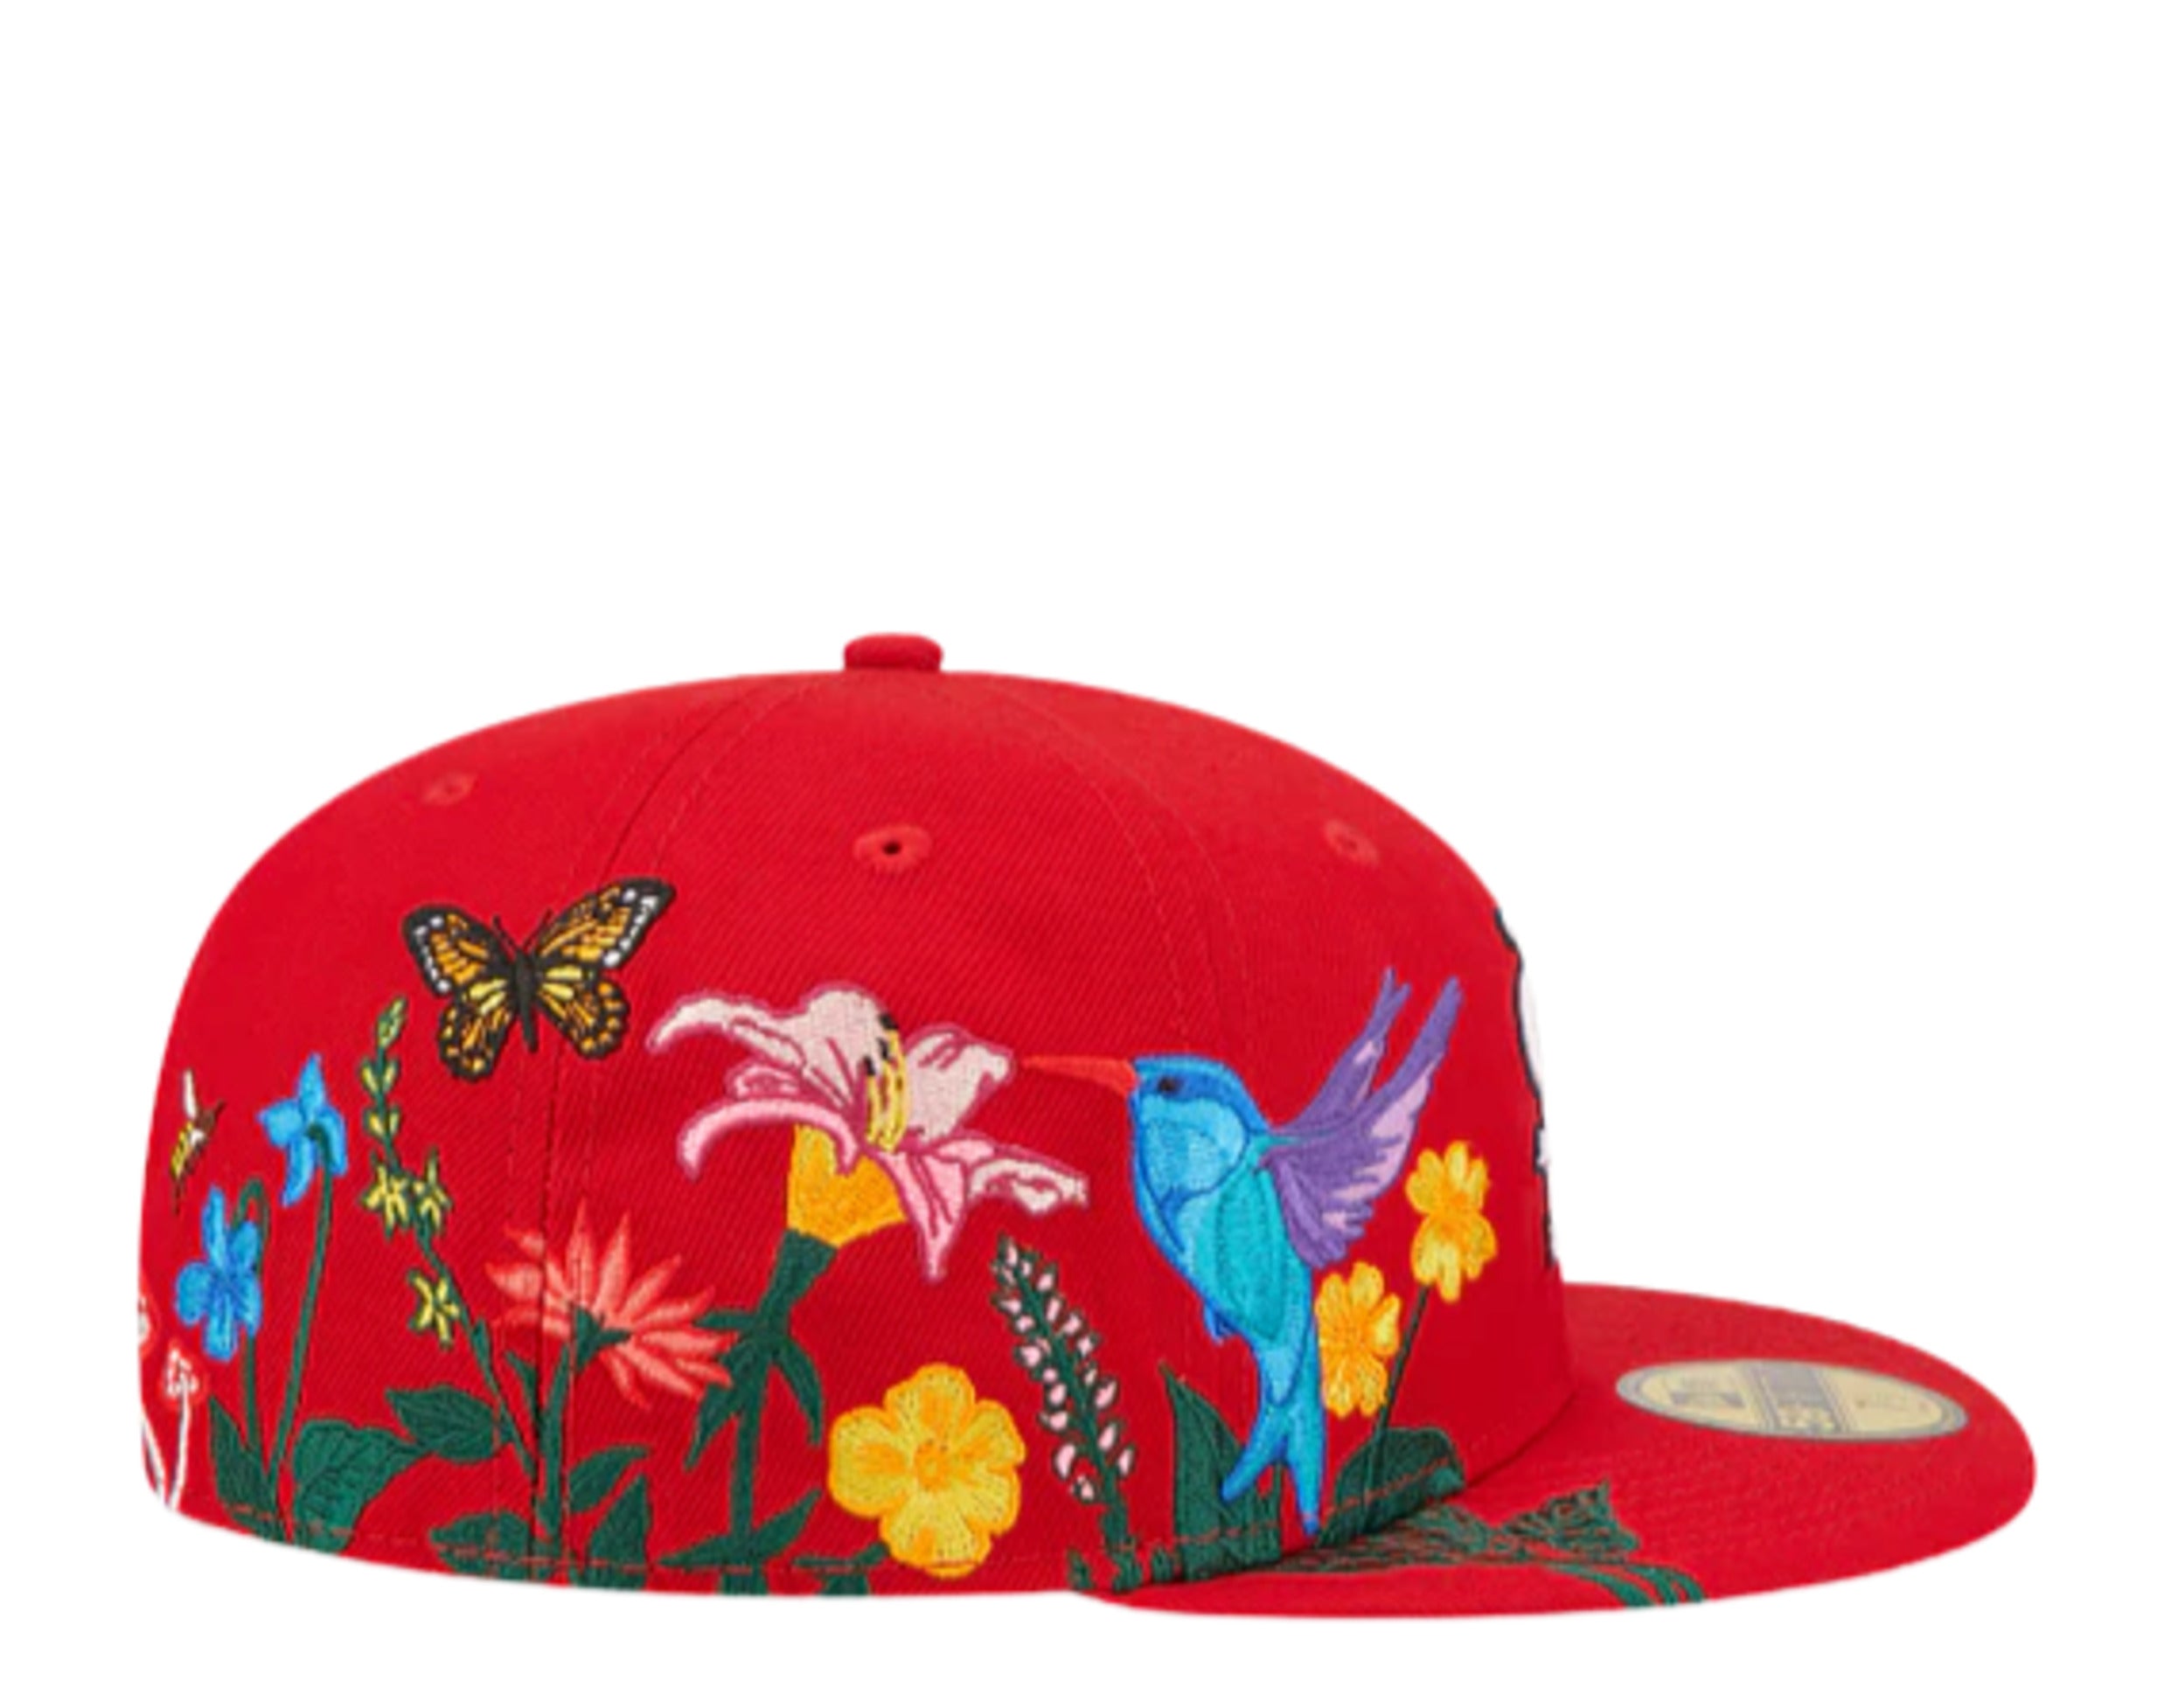 St. Louis Cardinals Bloom Sidepatch 59FIFTY Fitted Hat Pink UV / 7 5/8